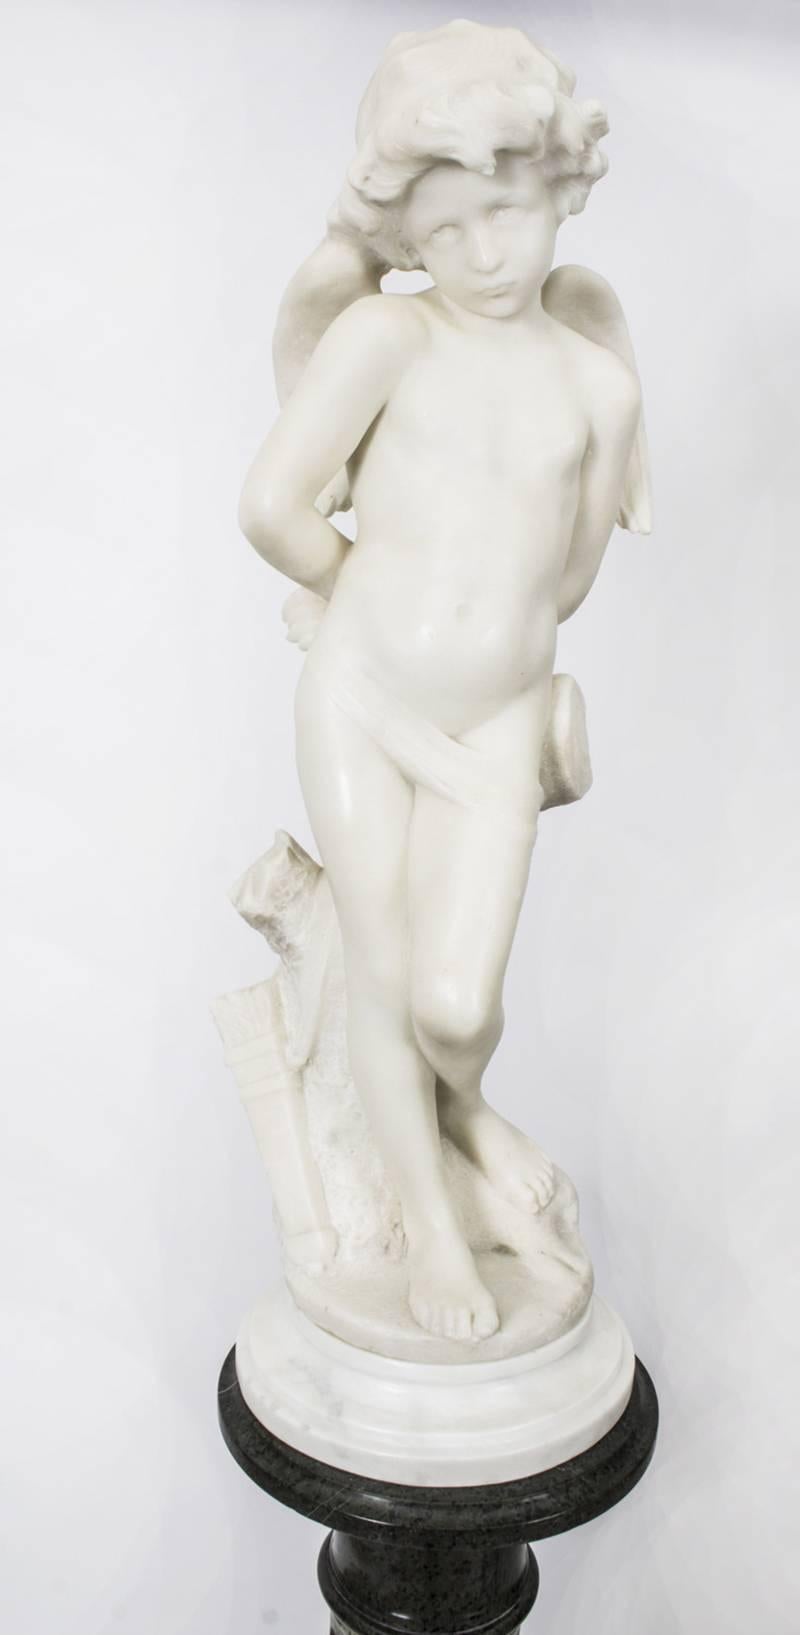 A lovely French marble sculpture by Denise Delavigne titled "Les Liens De L'amour", which translates as Cupid Bound, raised on it's original Serpentine marble pedestal, circa 1890 in date.

The beautiful sculpture is made from stunning